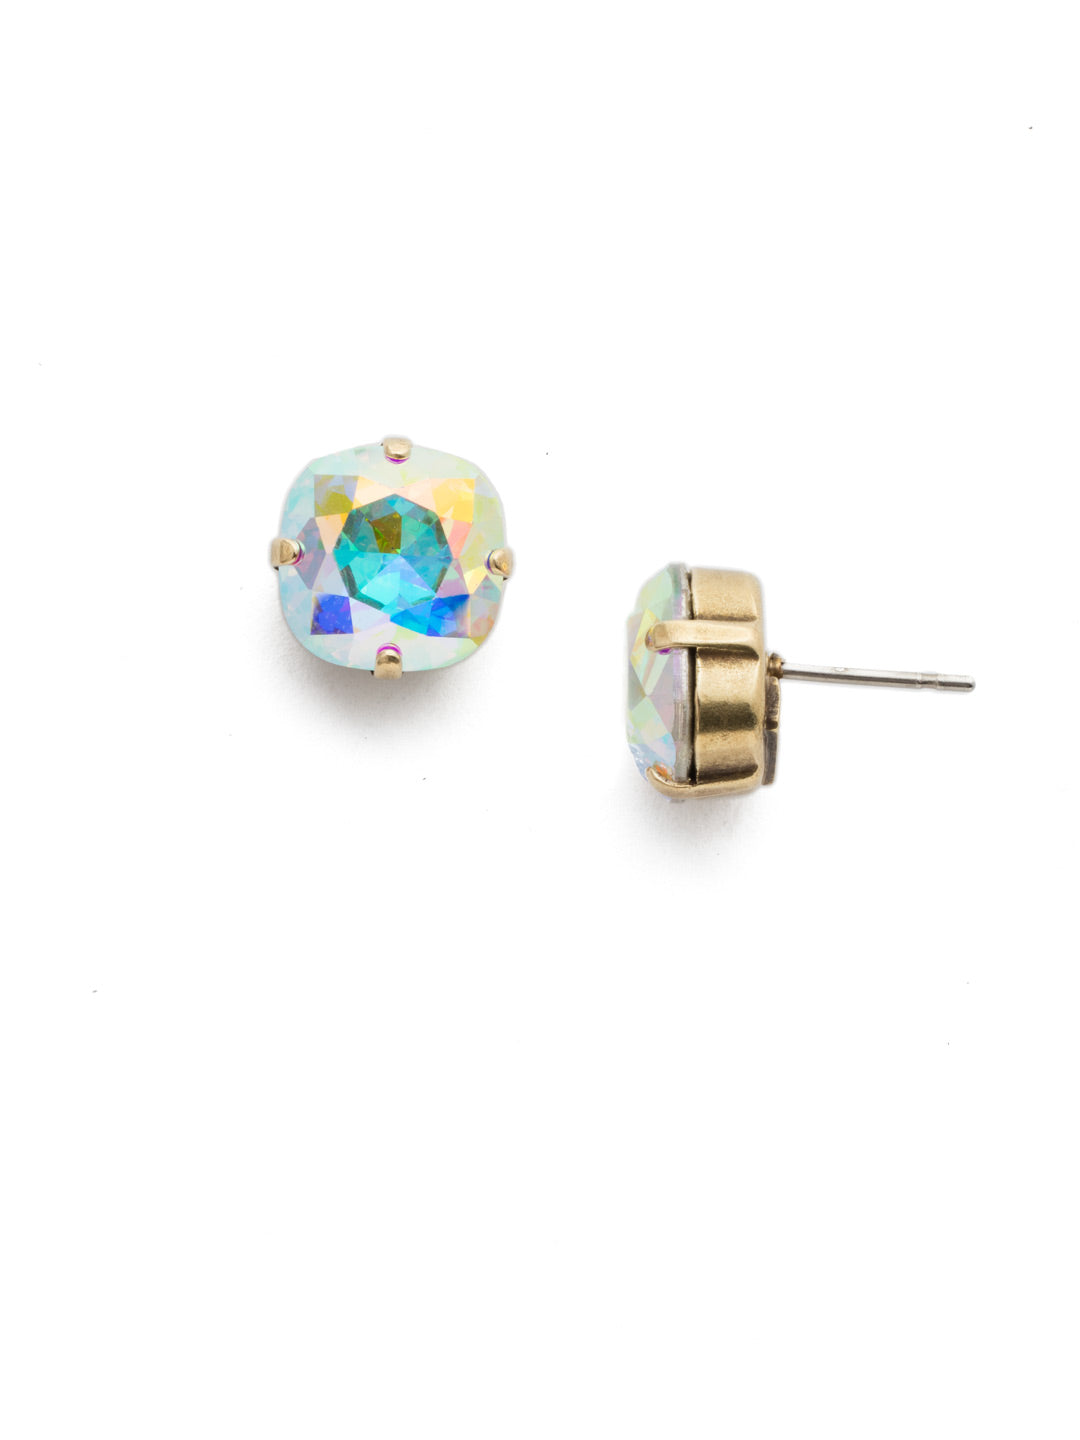 Halcyon Stud Earrings - EDH25AGCAB - <p>A beautiful, luminous cushion-cut crystal in a classic four-pronged setting that's ideal for everyday wear. From Sorrelli's Crystal Aurora Borealis collection in our Antique Gold-tone finish.</p>